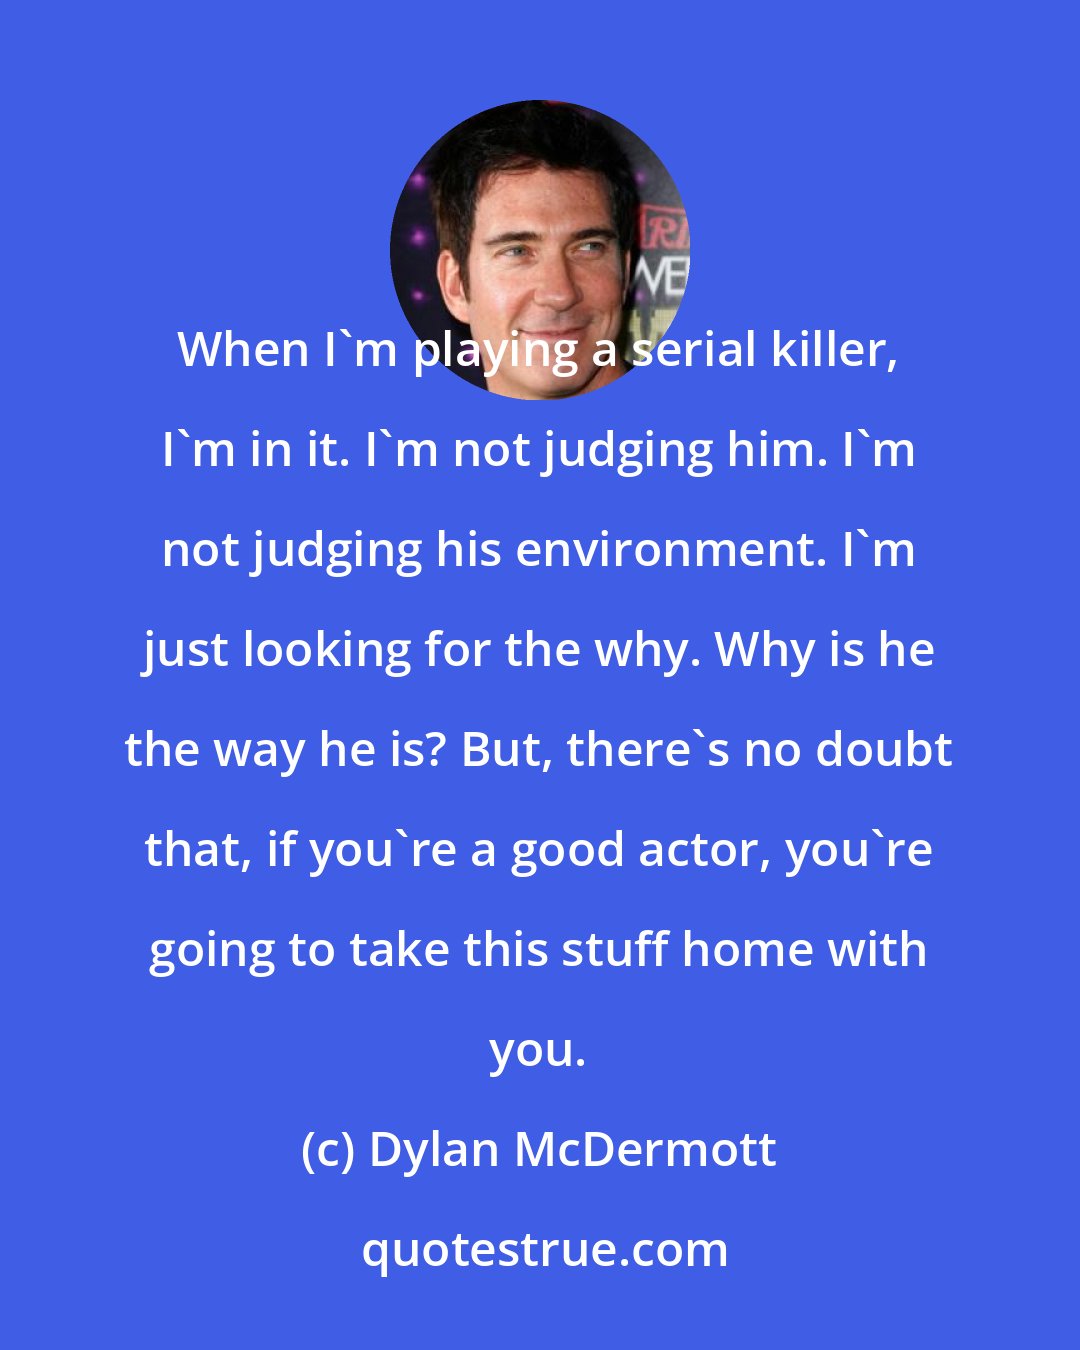 Dylan McDermott: When I'm playing a serial killer, I'm in it. I'm not judging him. I'm not judging his environment. I'm just looking for the why. Why is he the way he is? But, there's no doubt that, if you're a good actor, you're going to take this stuff home with you.